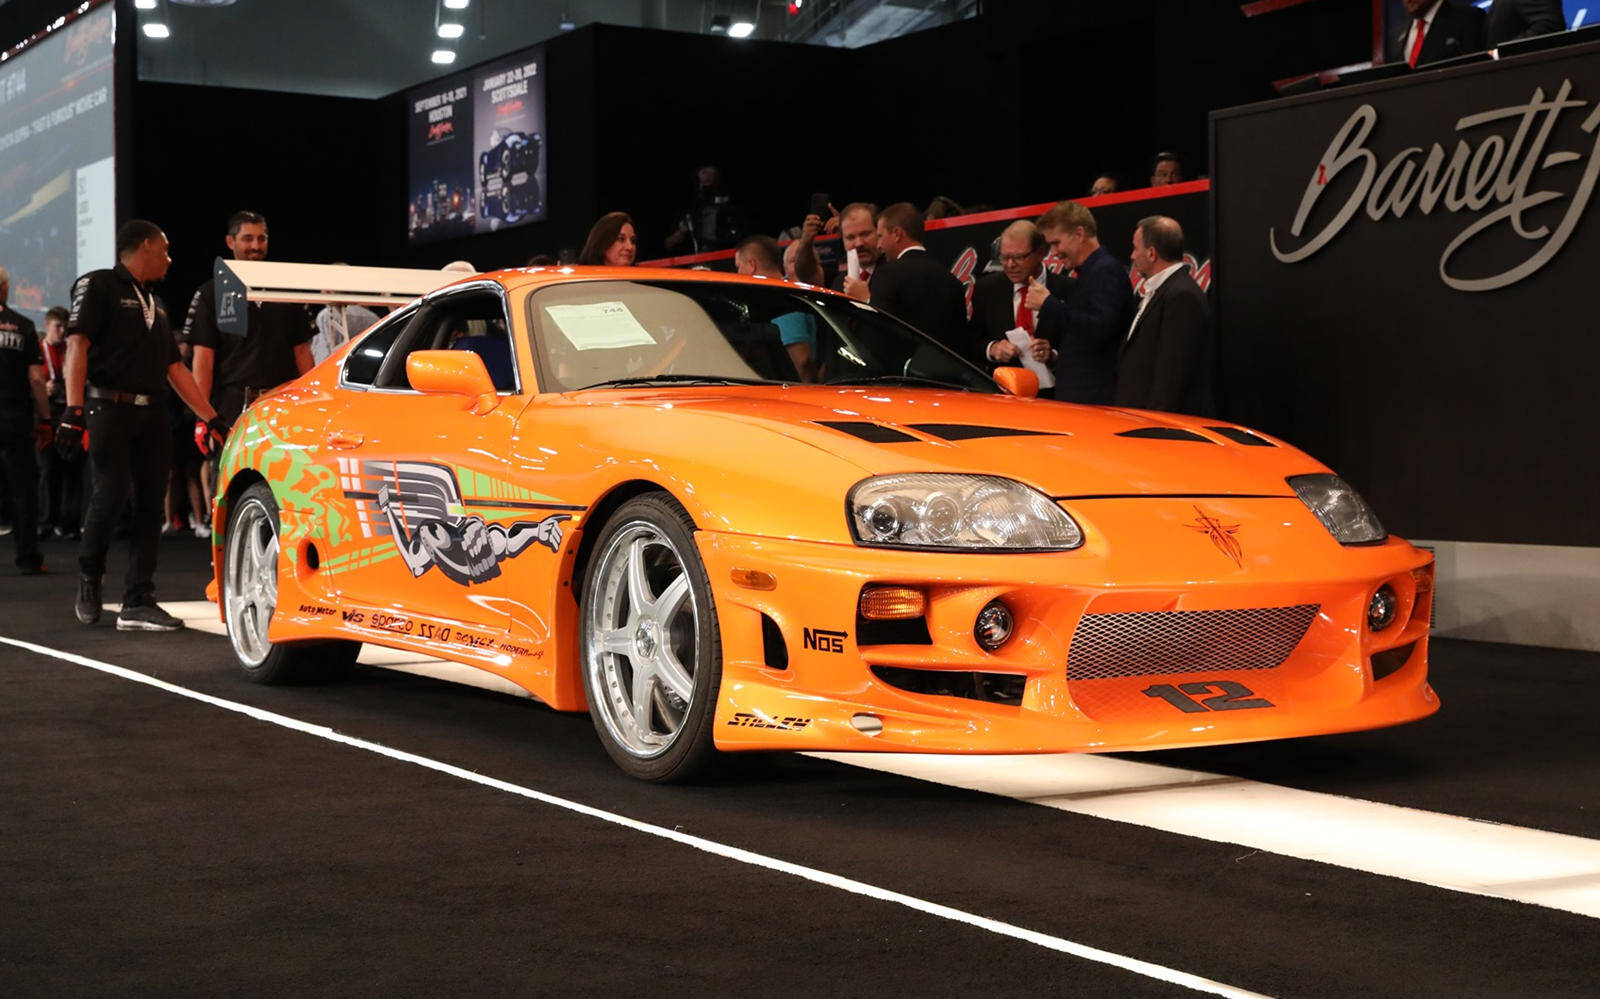 Toyota Supra From “Fast and Furious” Sets Auction Record - The Car Guide